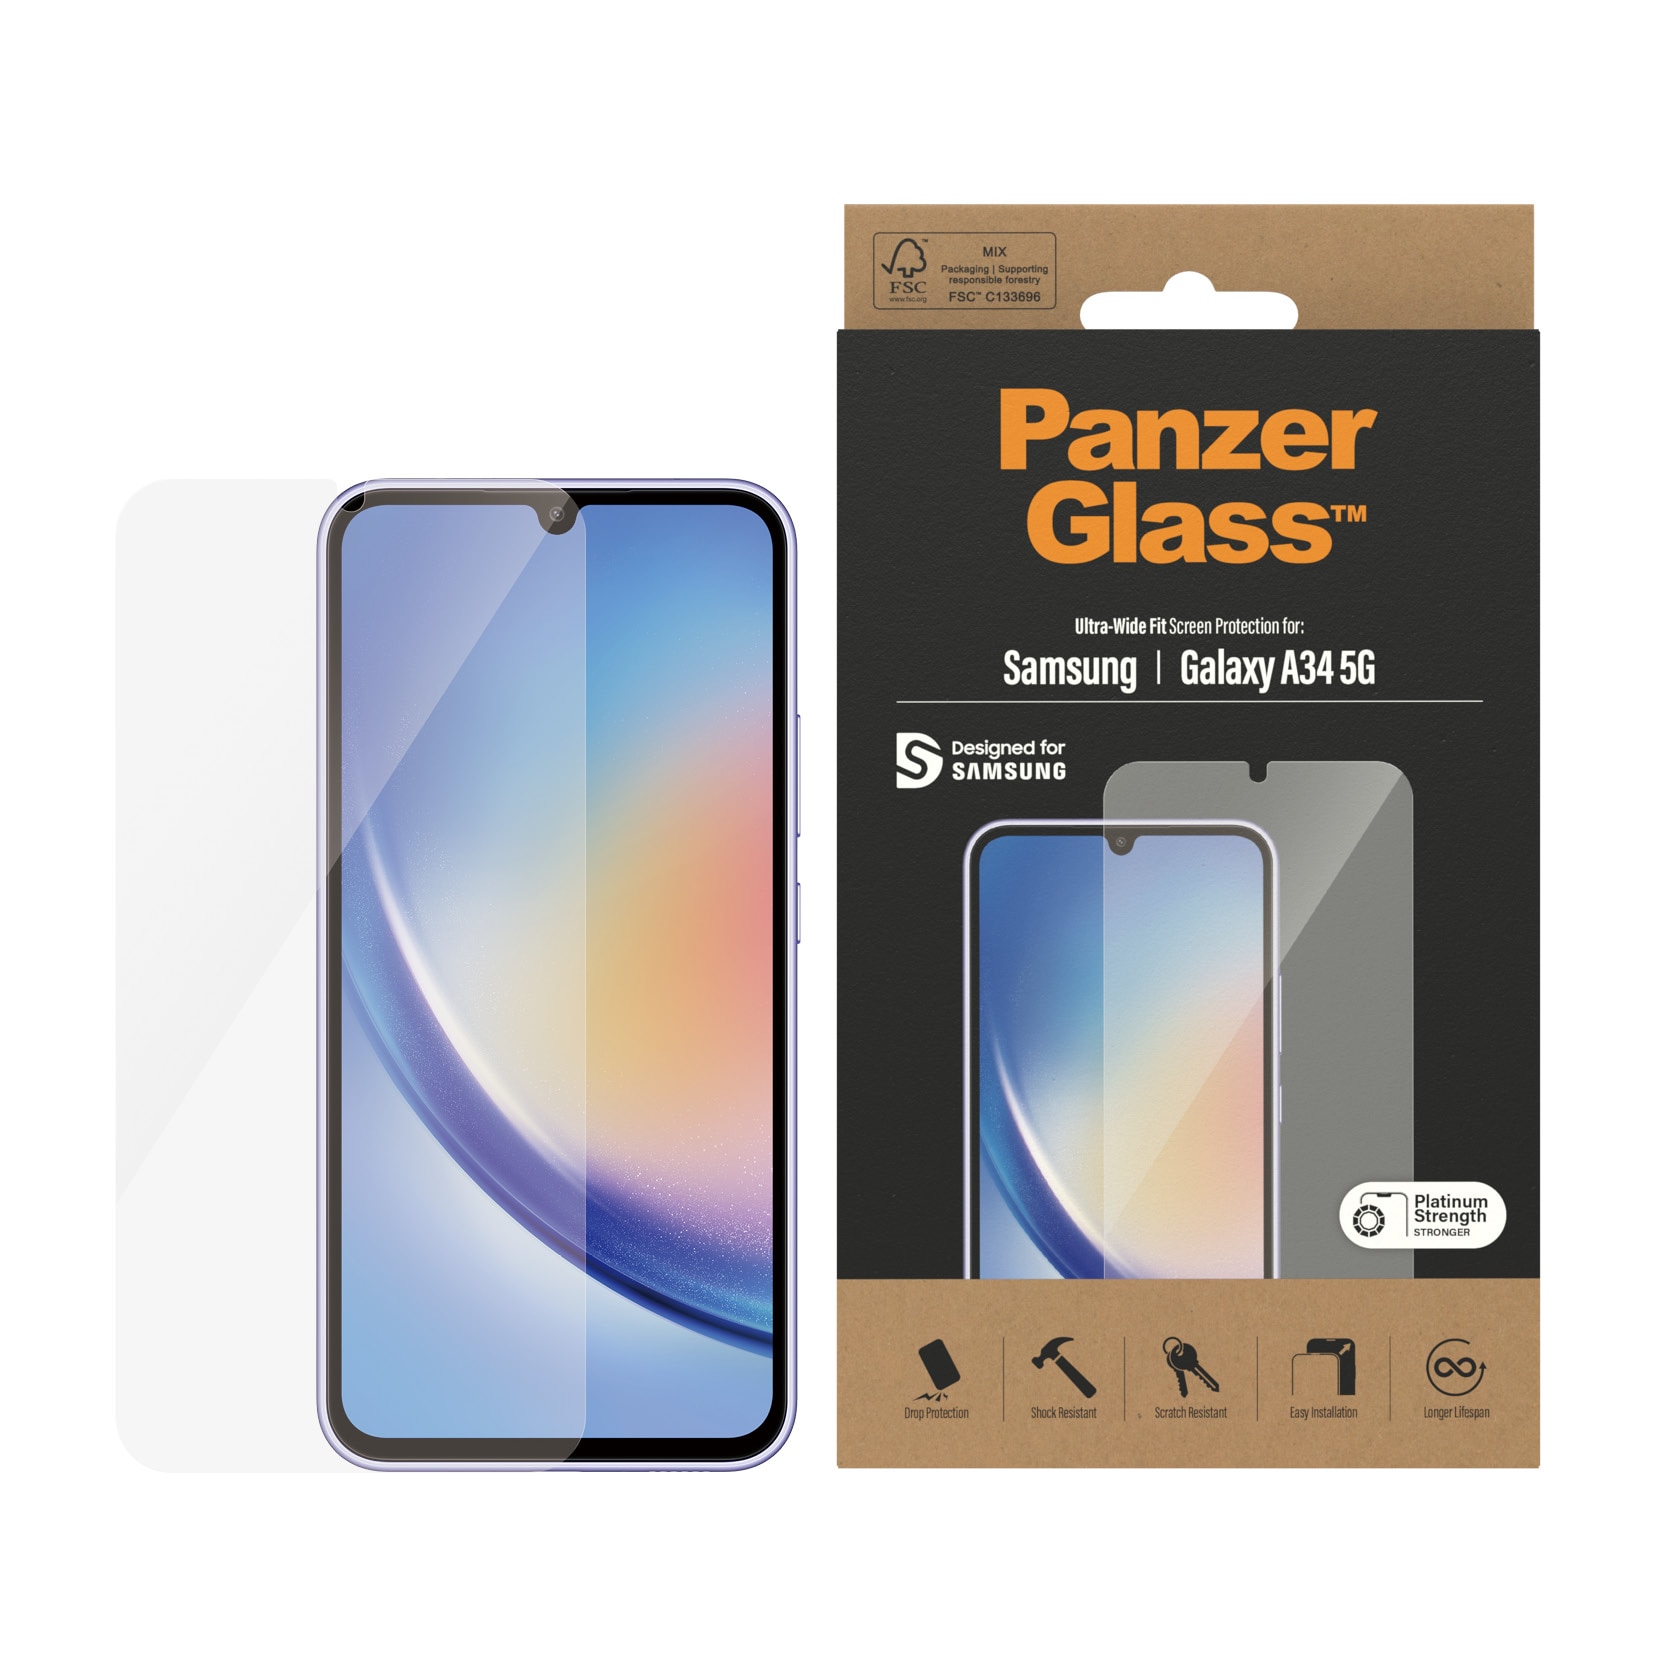 Samsung Galaxy A34 Screen Protector Ultra Wide Fit